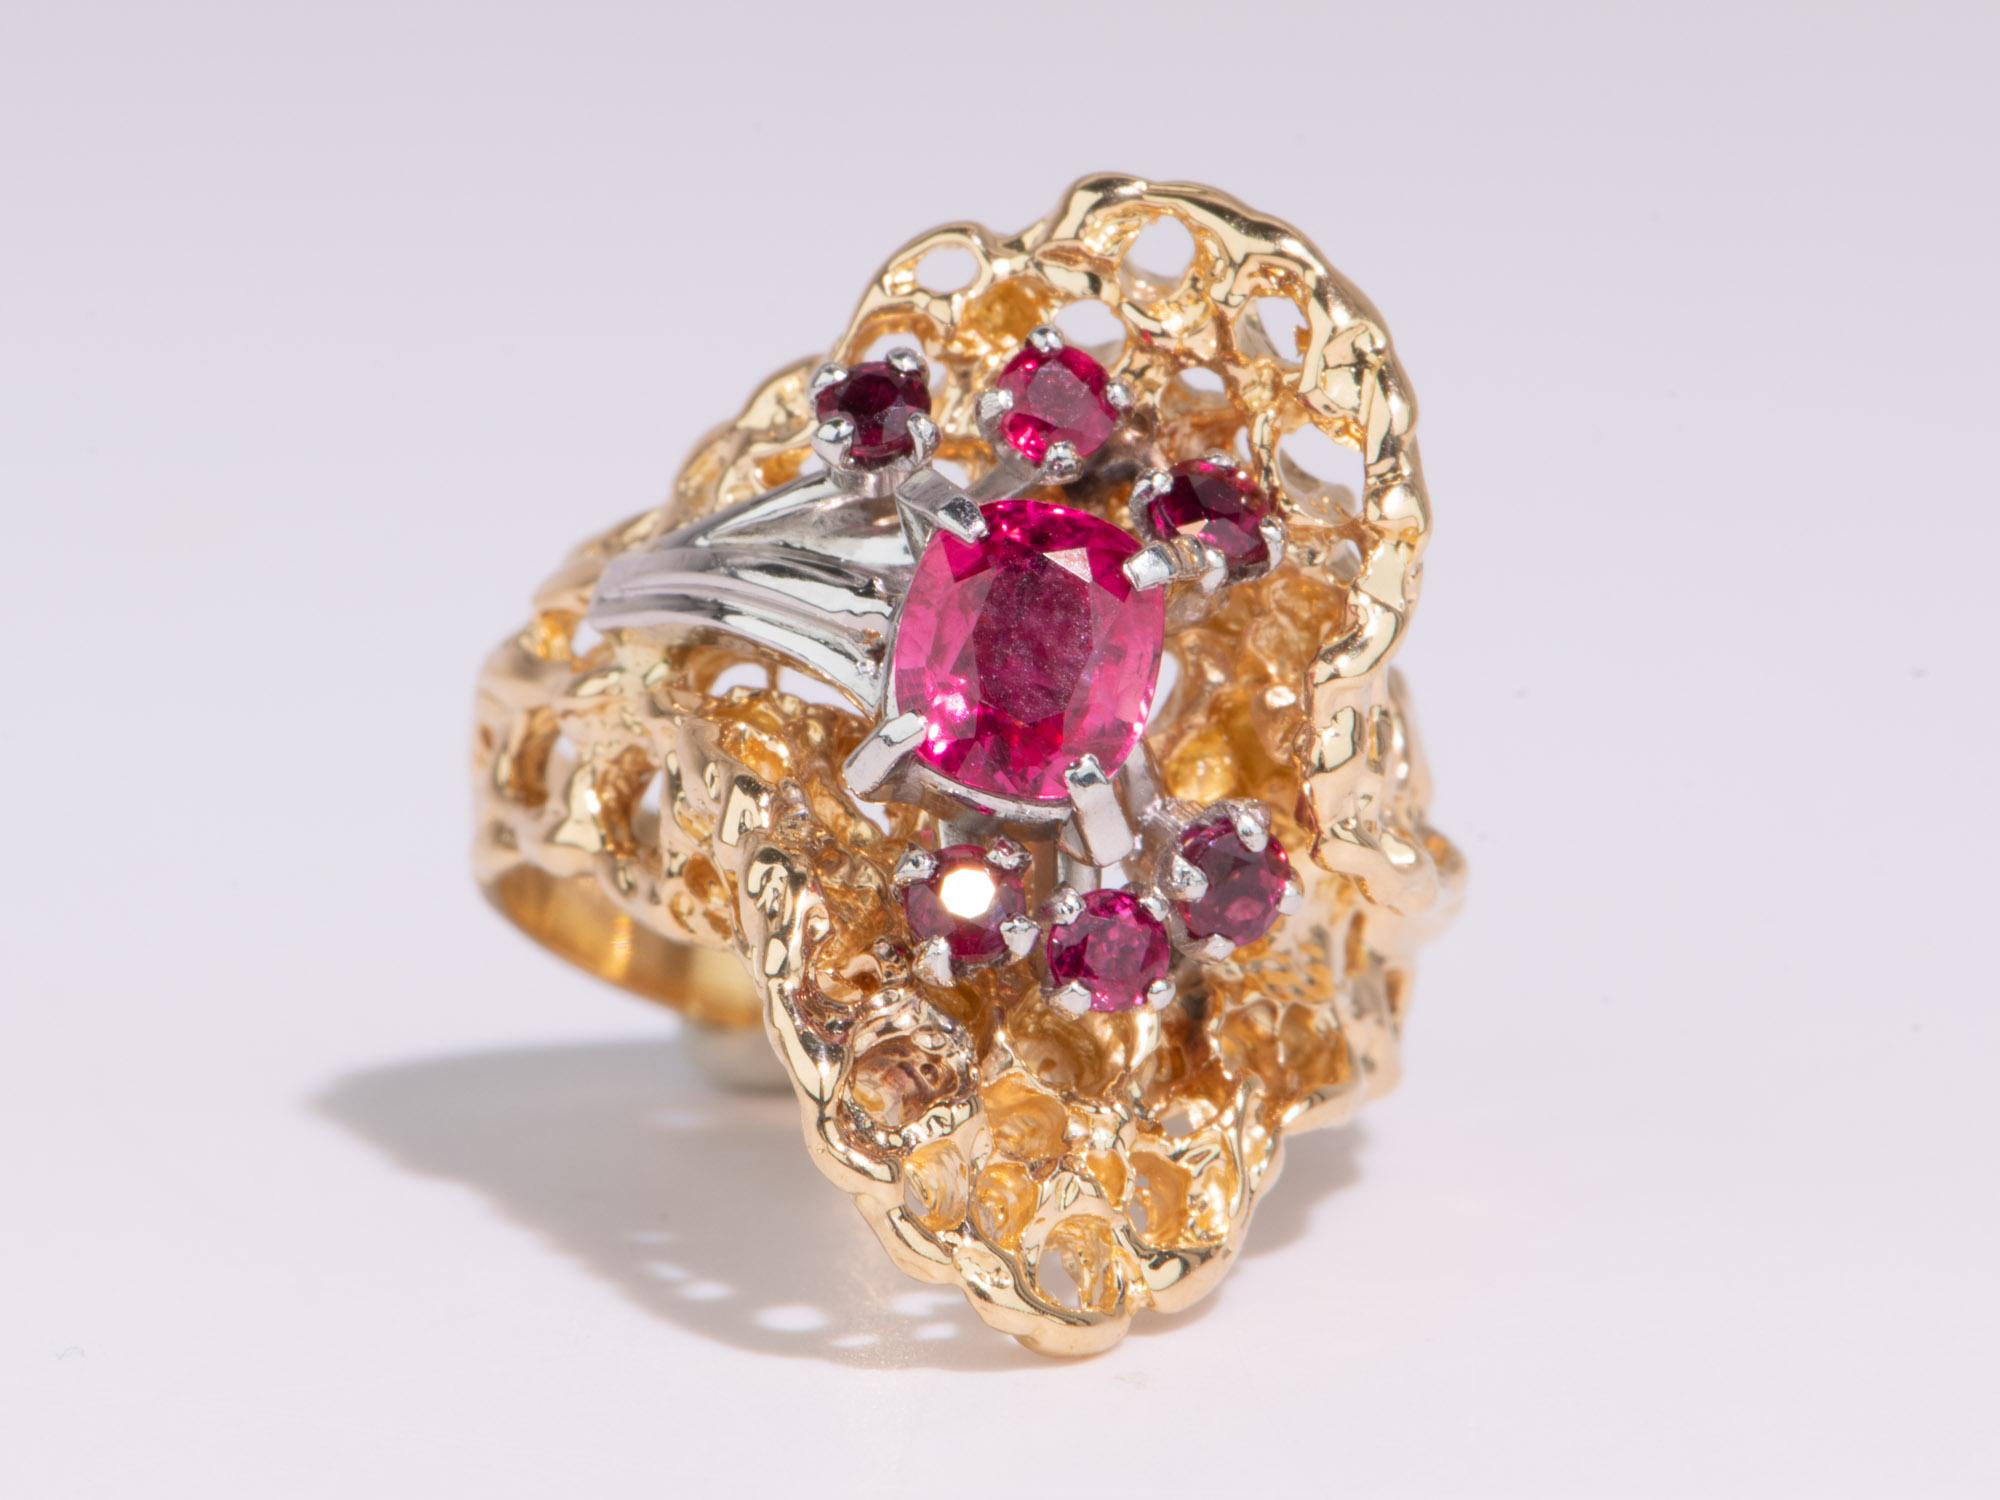 Uncut Organic Modernist Style Statement Ring with Tourmaline Clusters 18K Gold V1106 For Sale